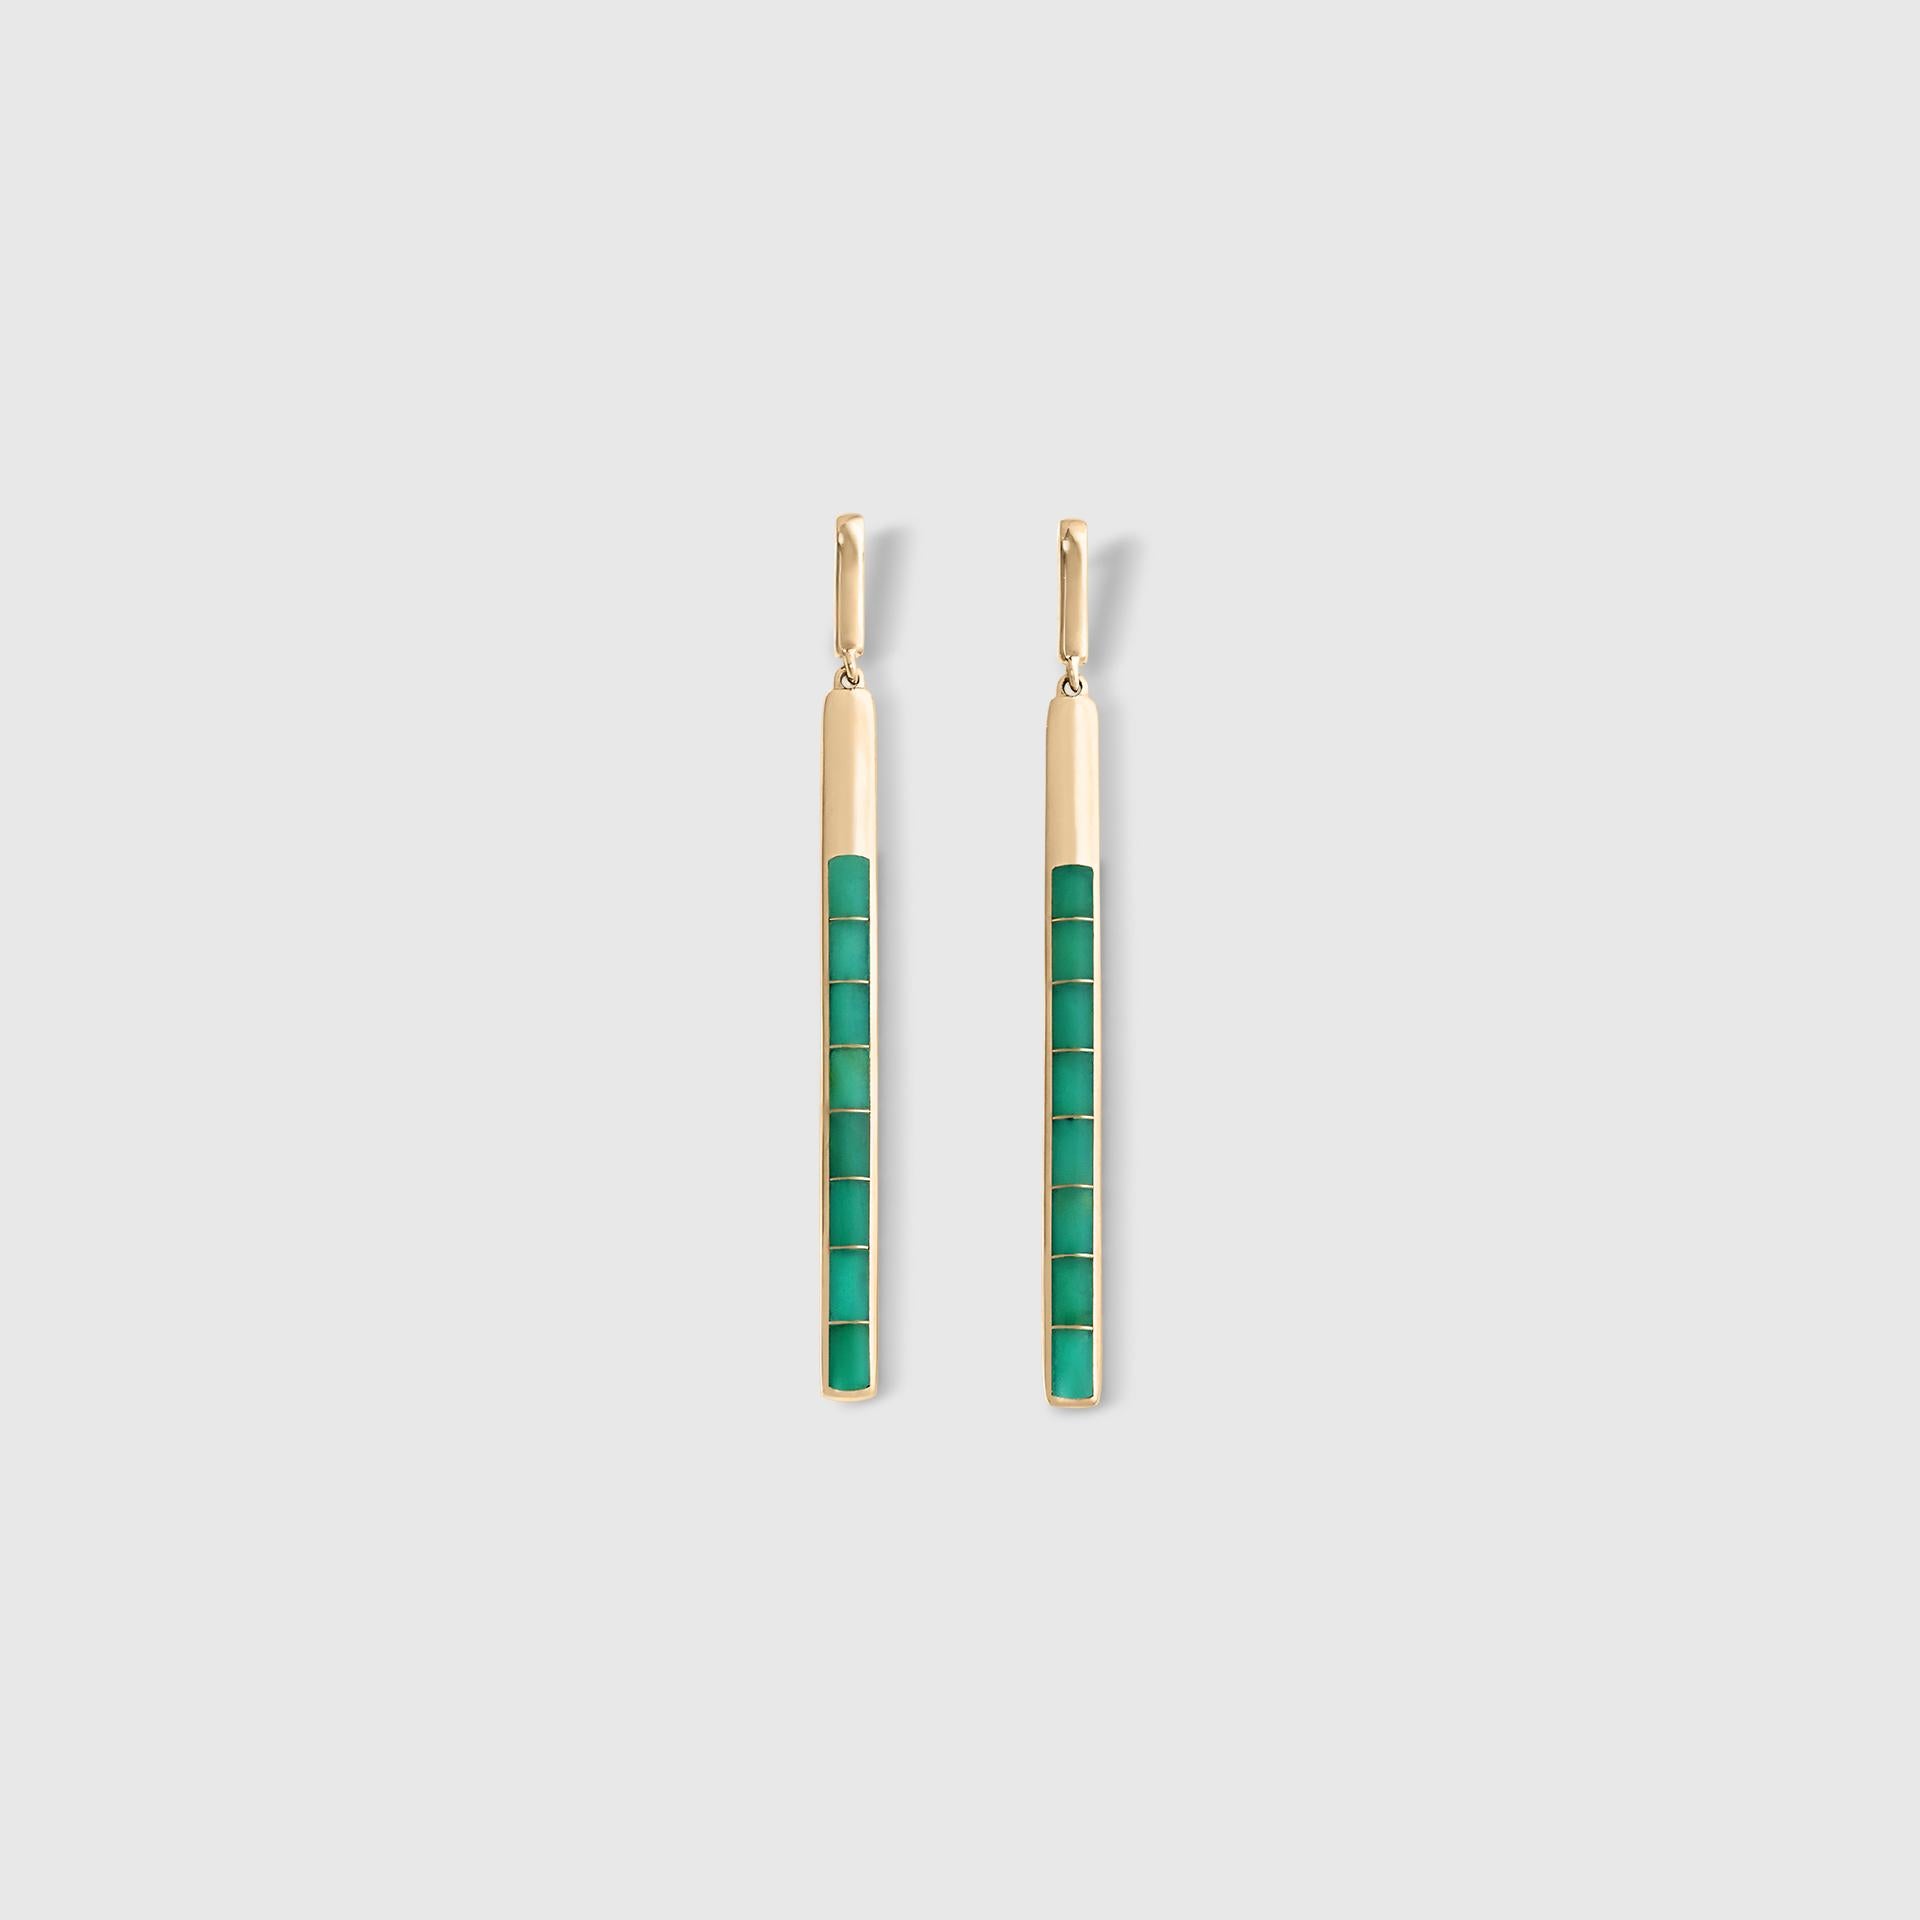 Long, Delicate, Chrysoprase Inlay Post Earrings, 14kt Yellow Gold, by Kabana, Measures 1 1/2